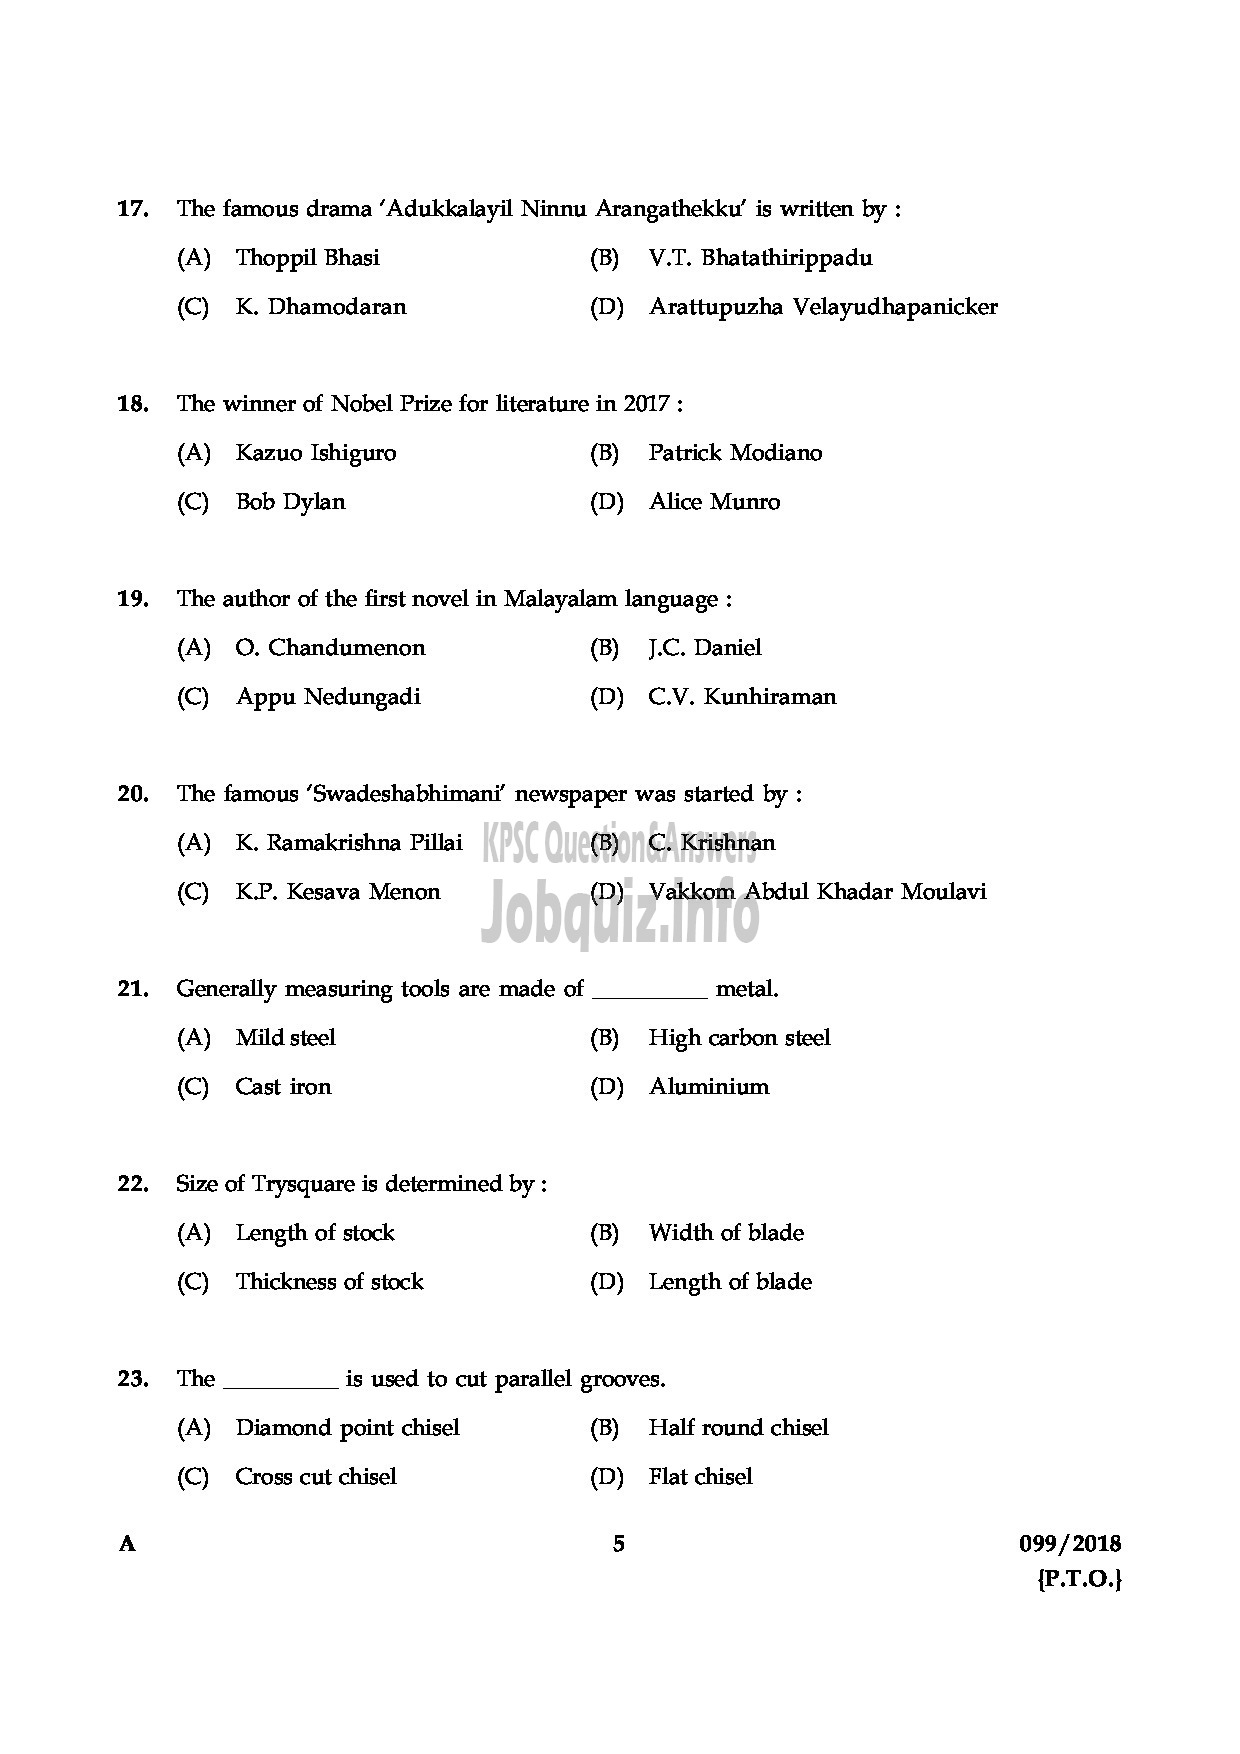 Kerala PSC Question Paper - JUNIOR INSTRUCTOR FITTER INDUSTRIAL TRAINING ENGLISH -5